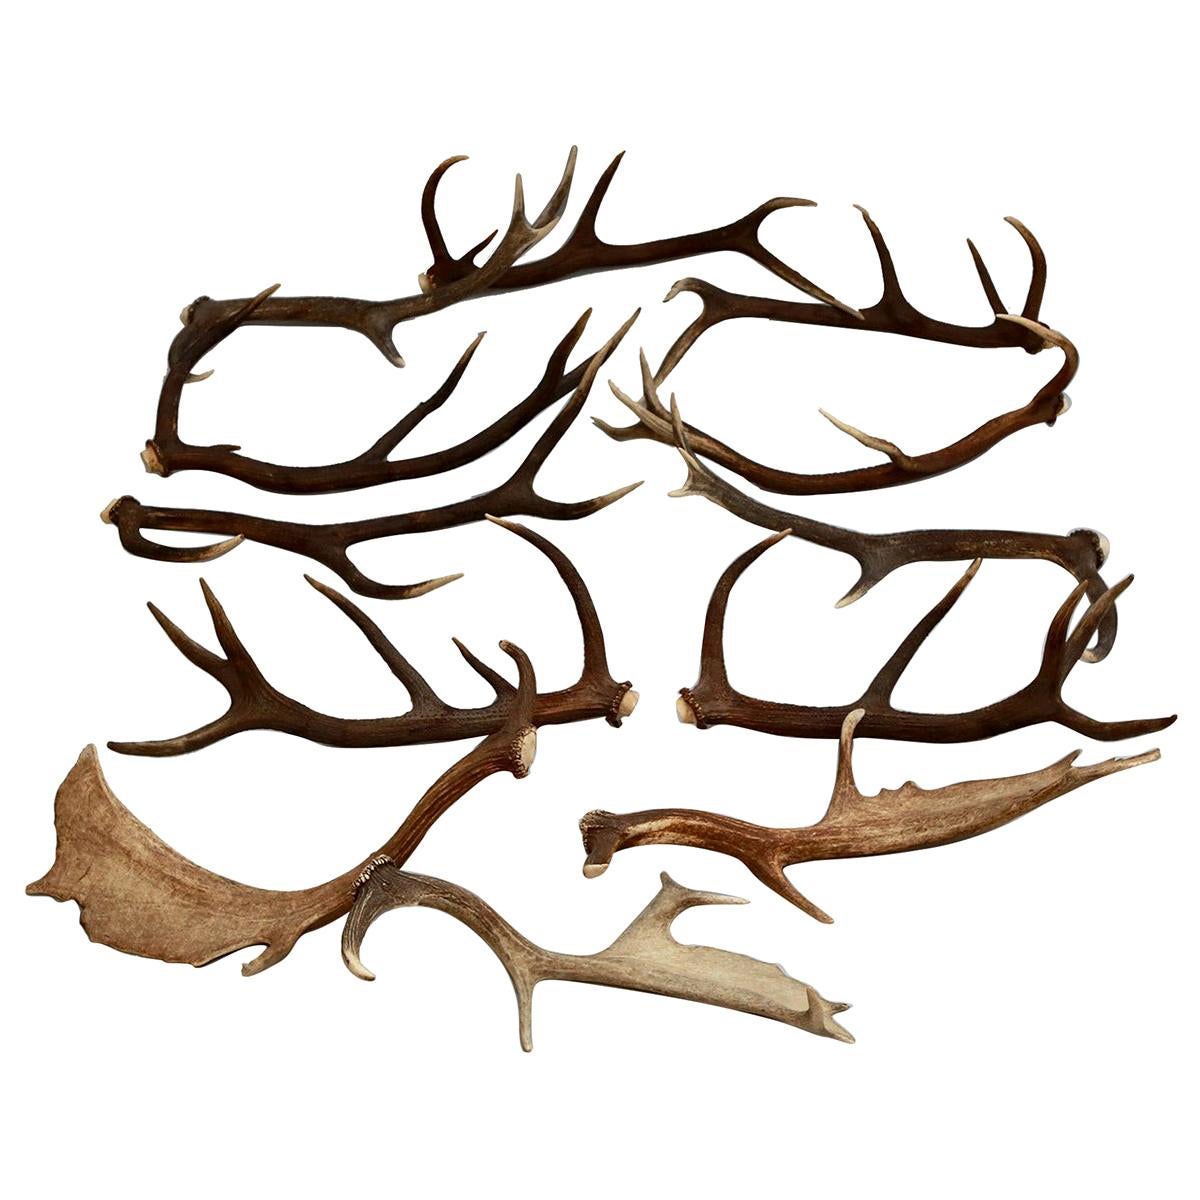 European Collection of Elk and Moose Antlers